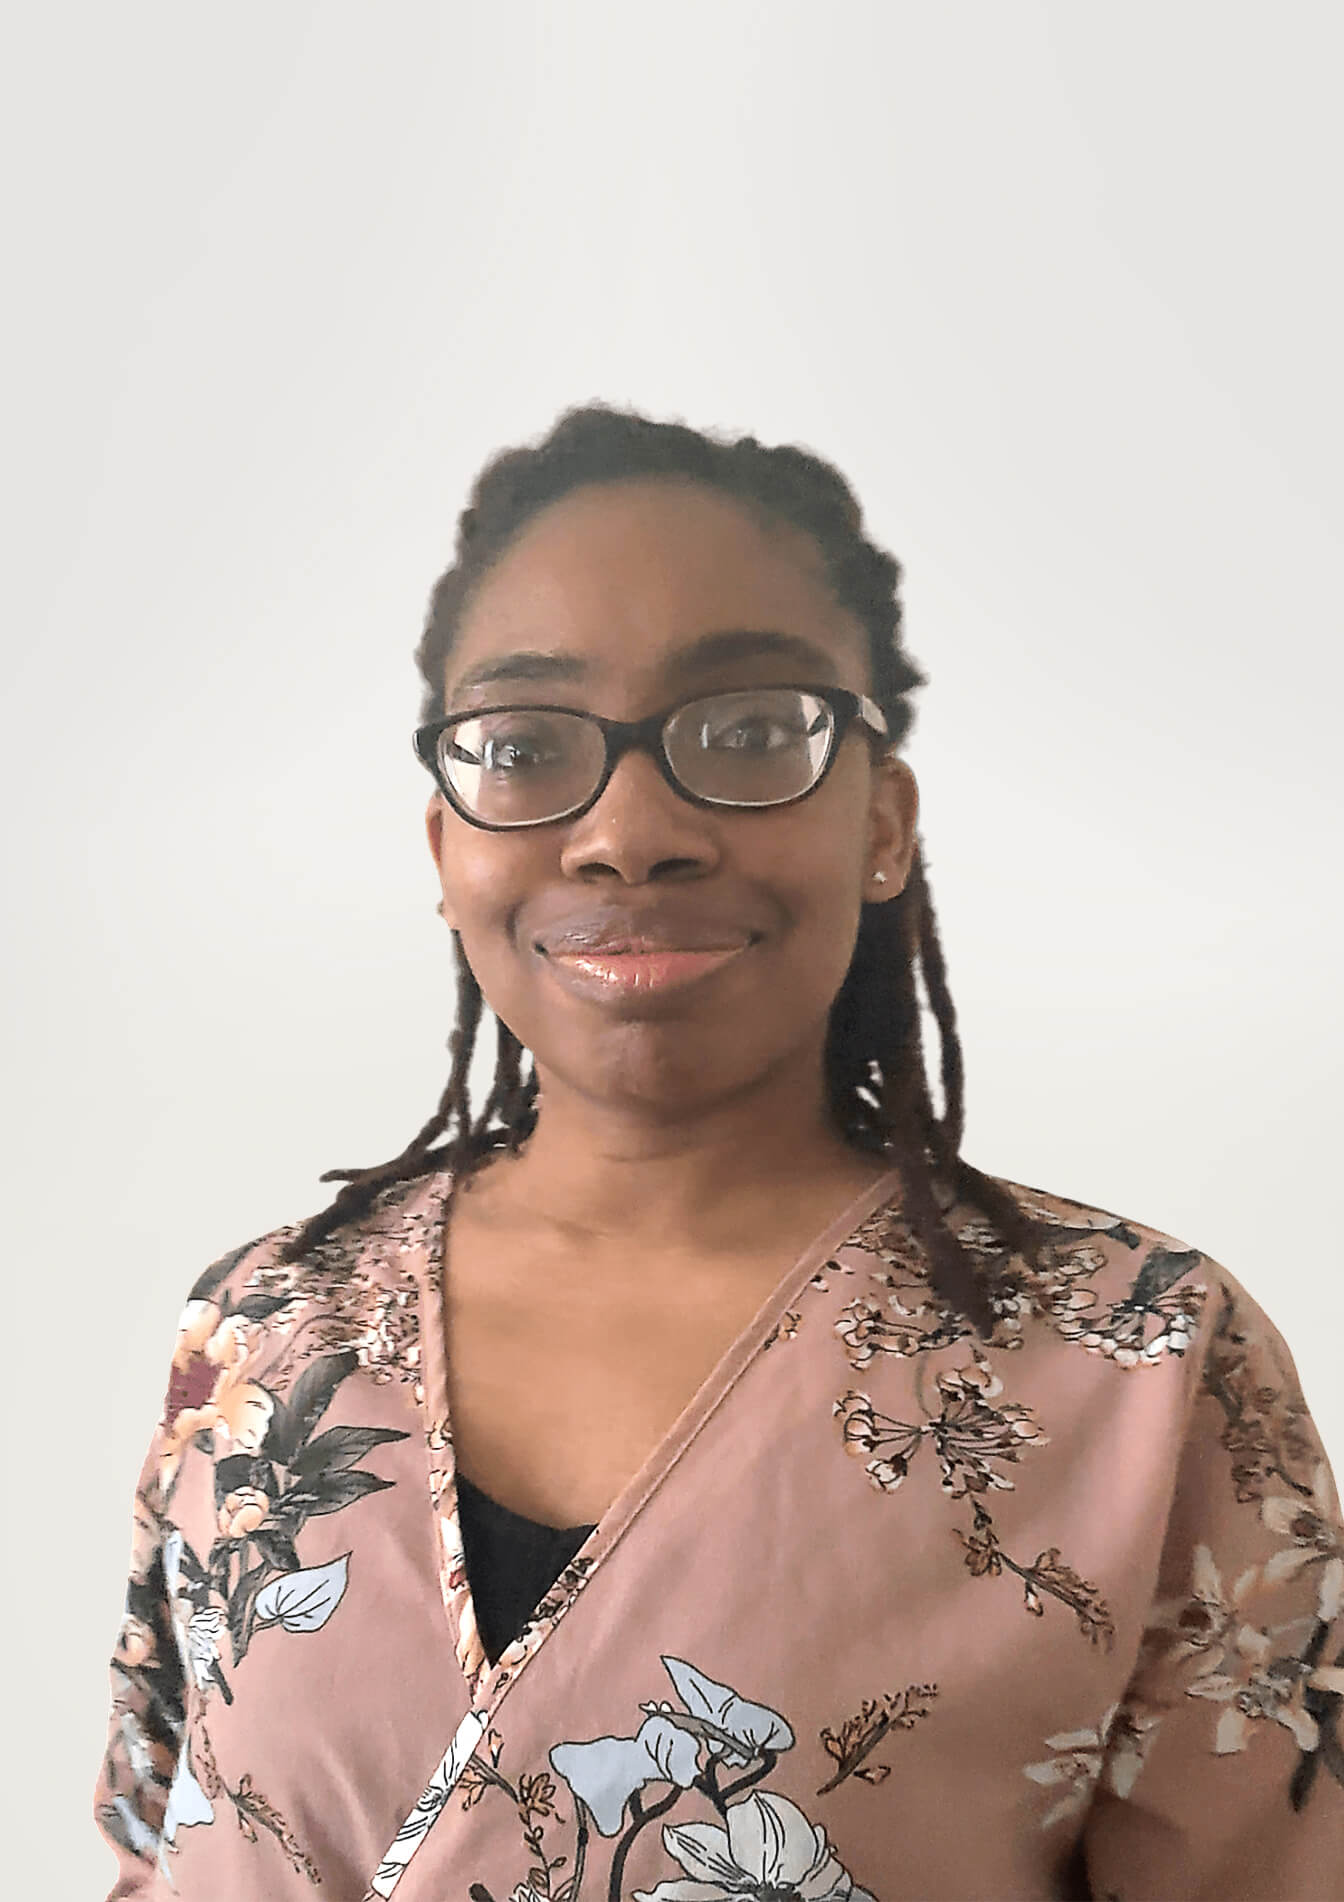 Woman with locs and glasses wearing a floral pattern shirt.